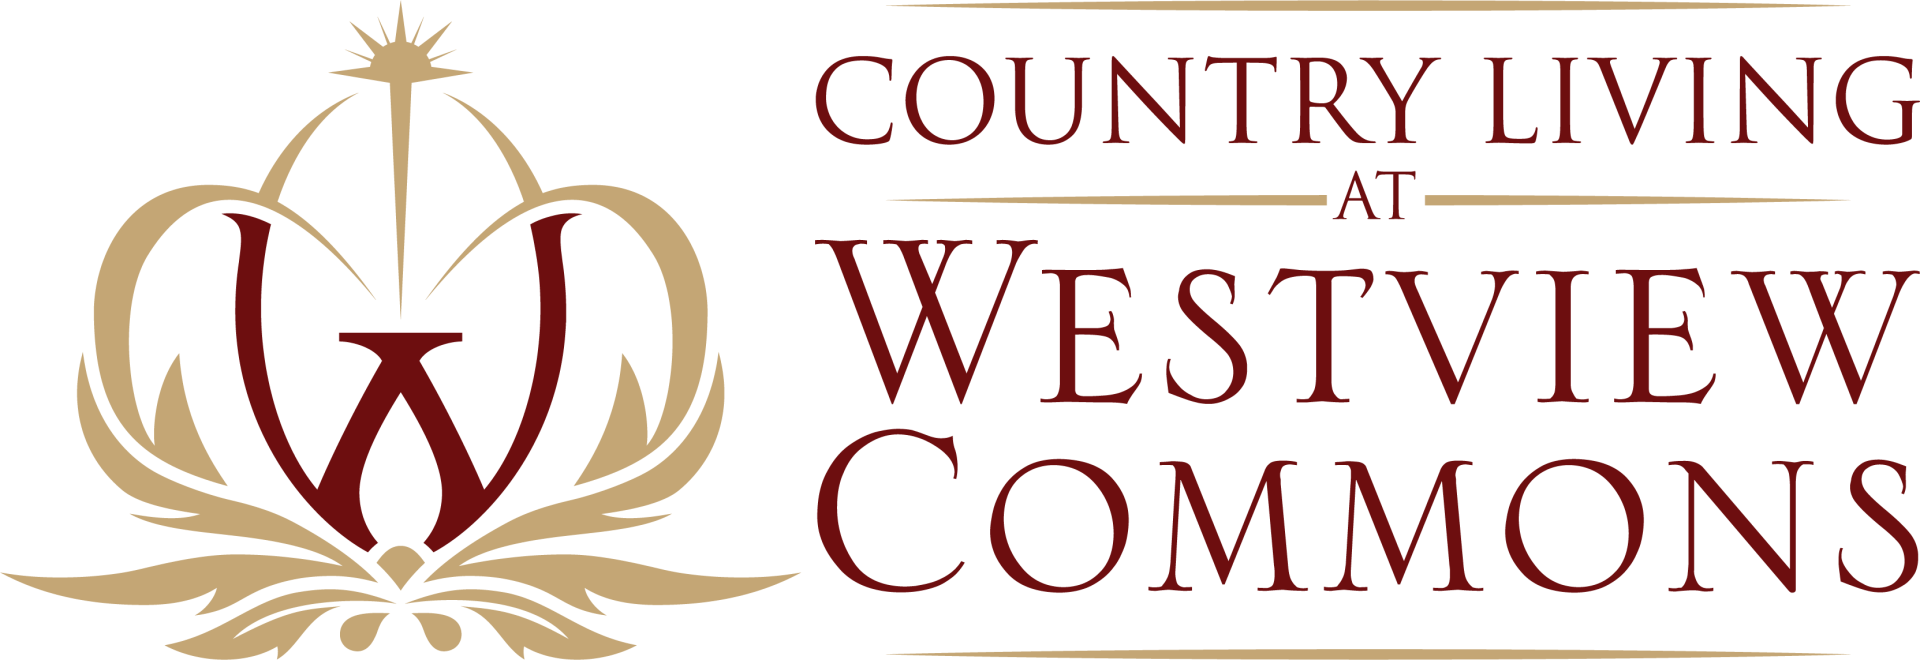 Country Living at Westview Commons logo